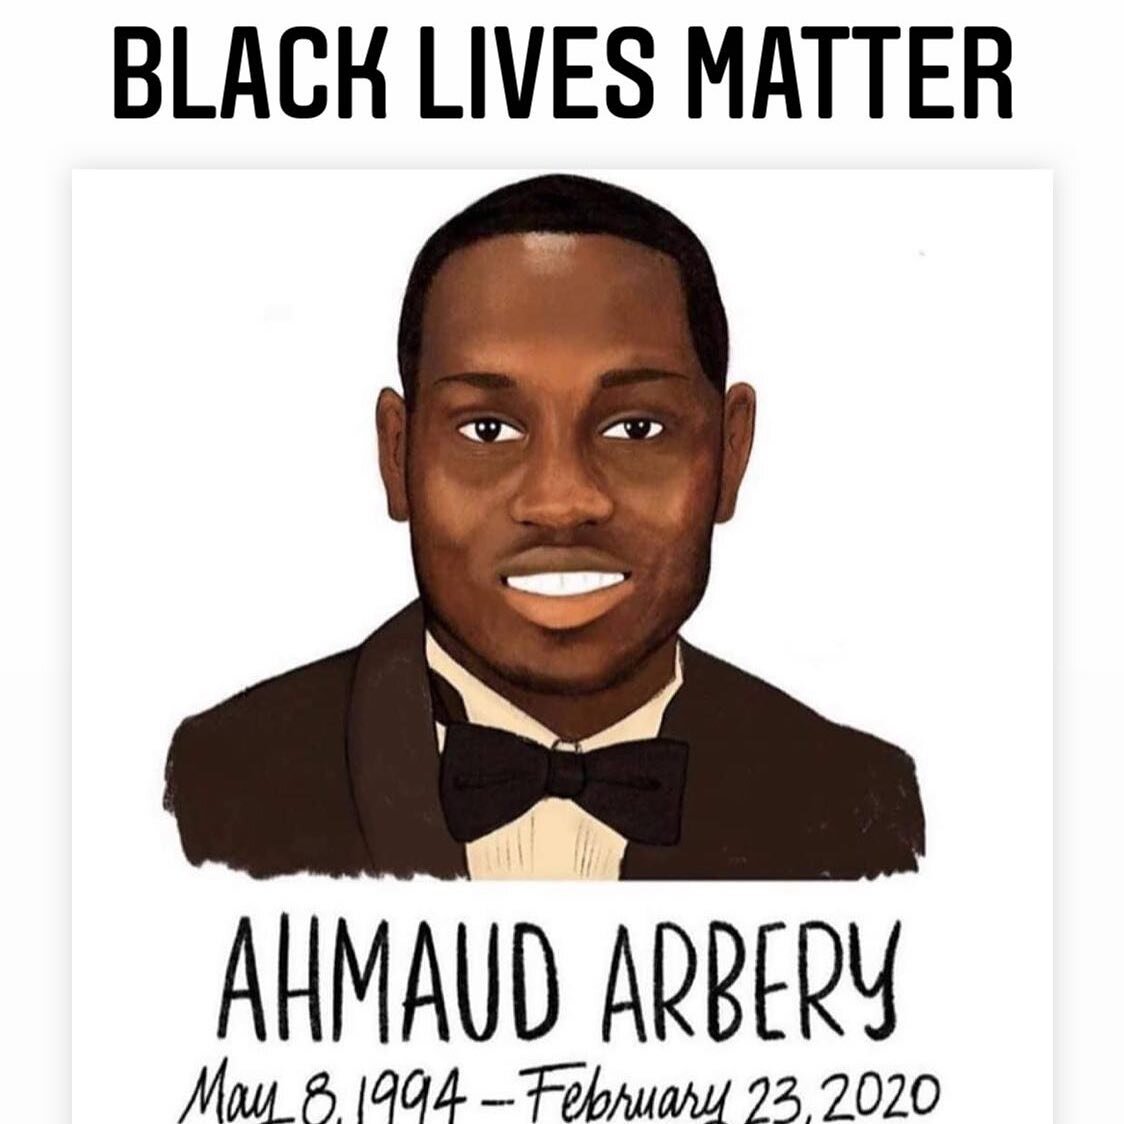 My thoughts and prayers go to Ahmaud&rsquo;s family.  This verdict won&rsquo;t bring him back, but it will show that his life mattered and he had every right to live and breathe free. One day a just verdict will be the norm. We have a long way to go.